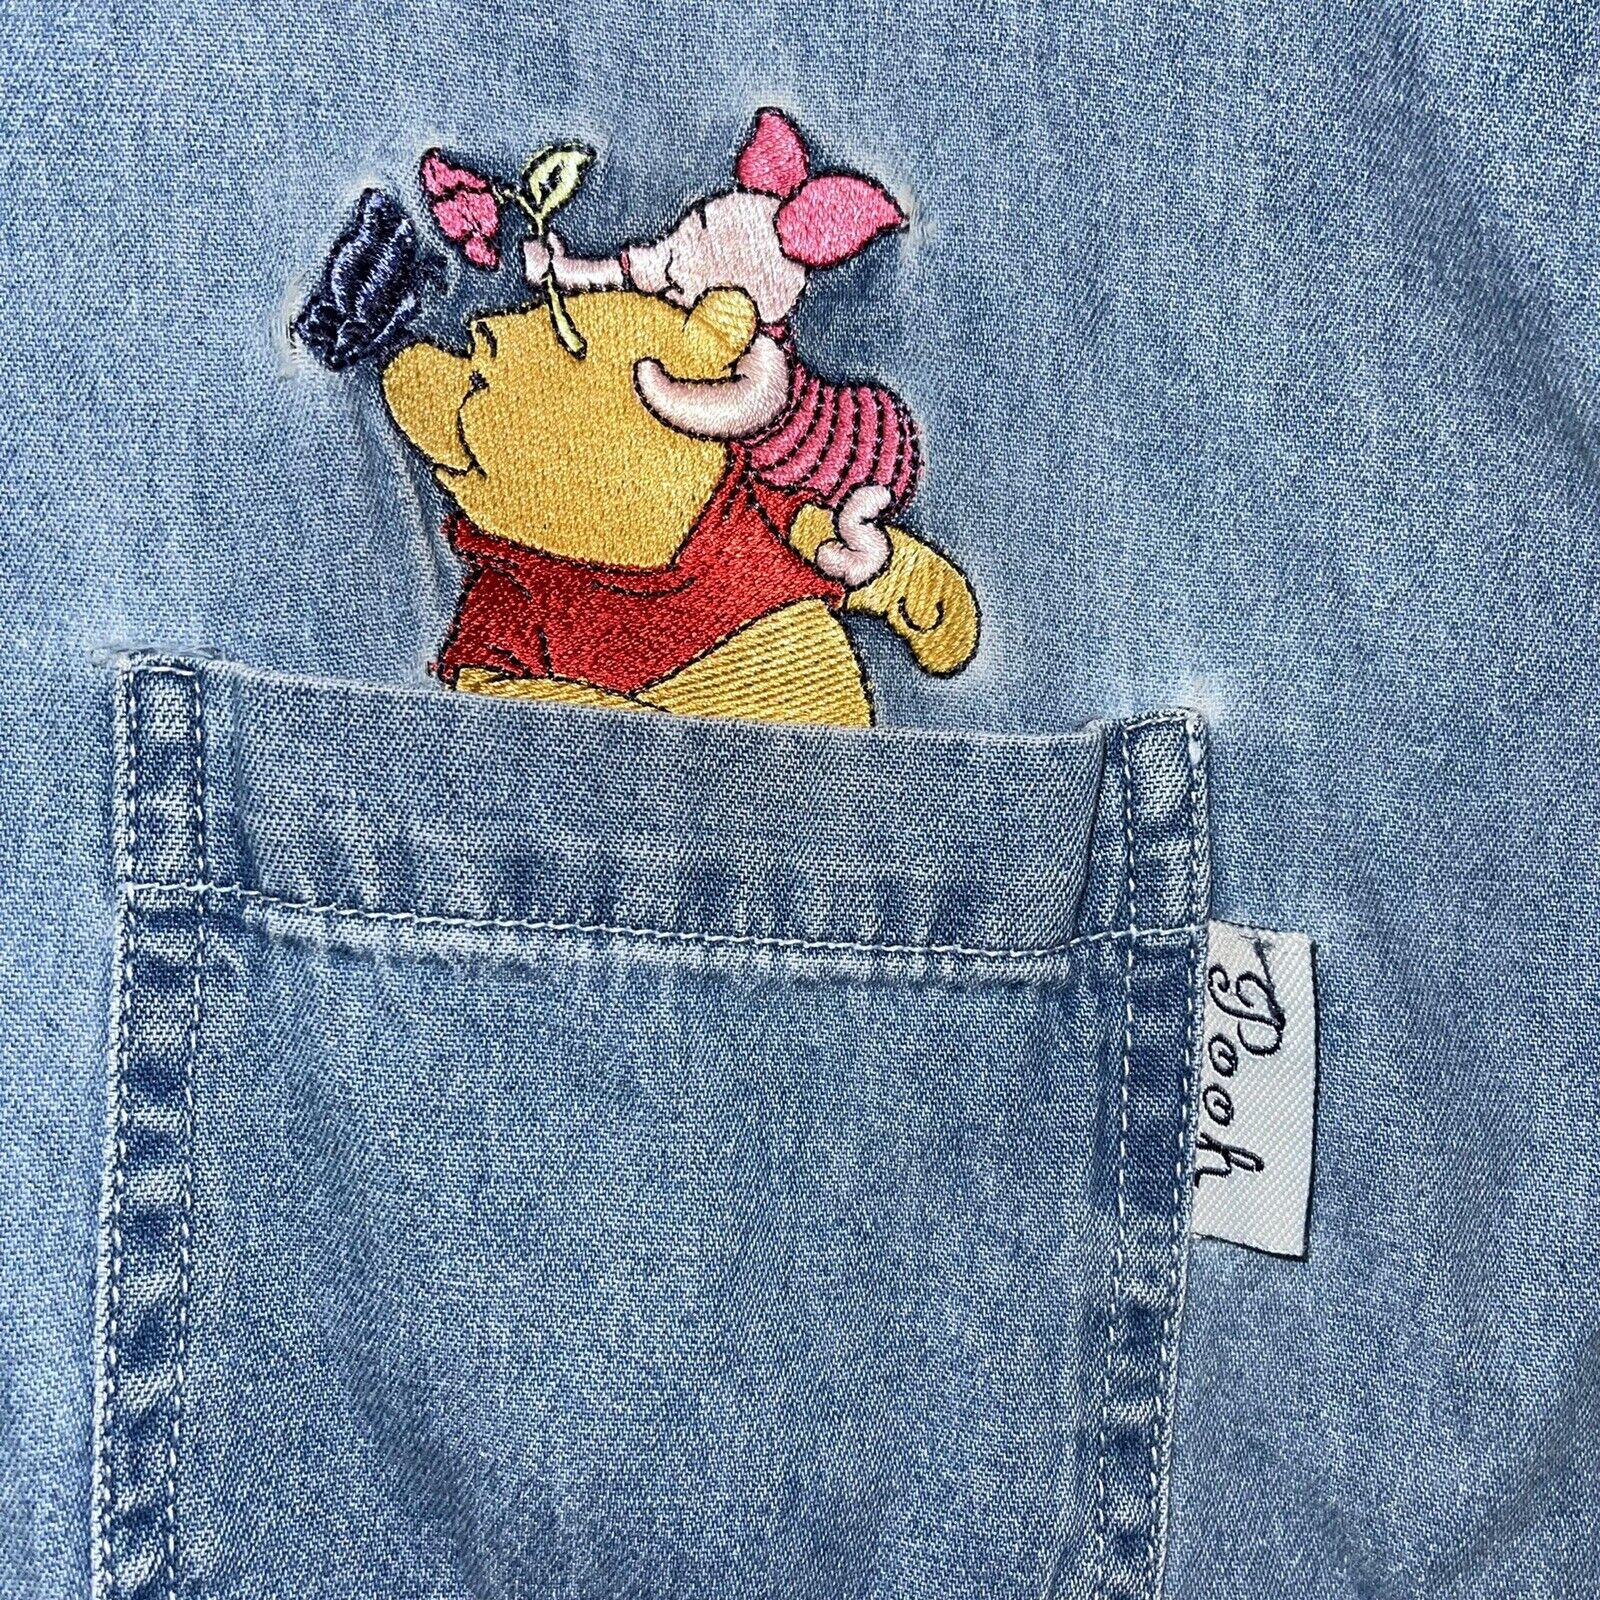 Vintage Pooh & Piglet embroidered denim shirt jerry leigh size 22/24 guc e100